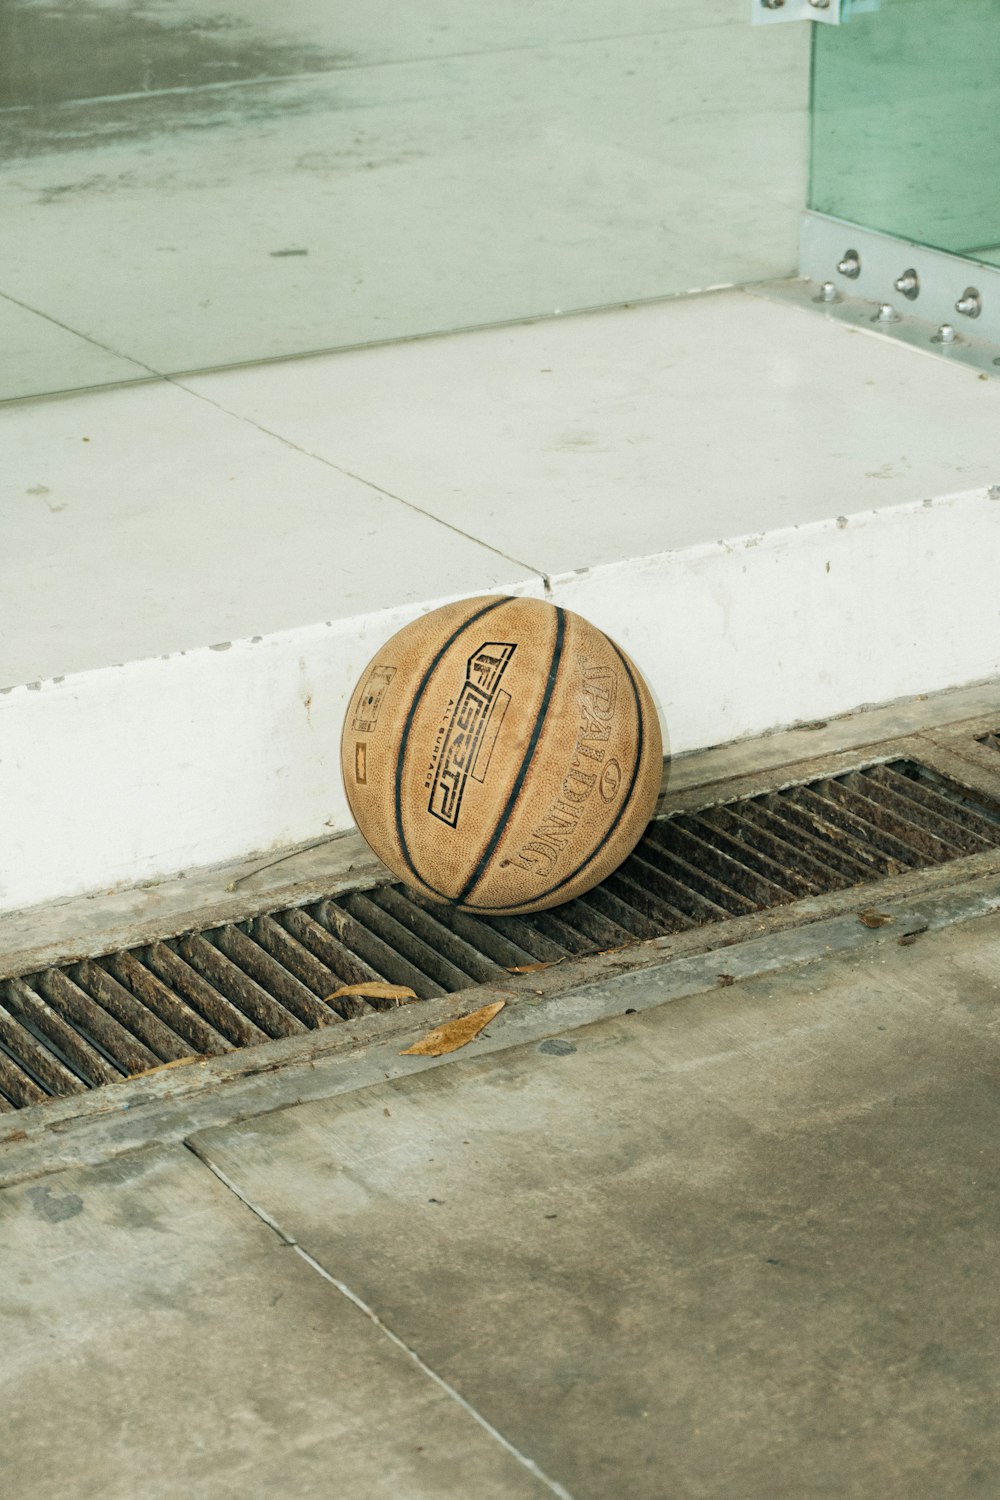 a basketball sitting on the ground next to a drain grate